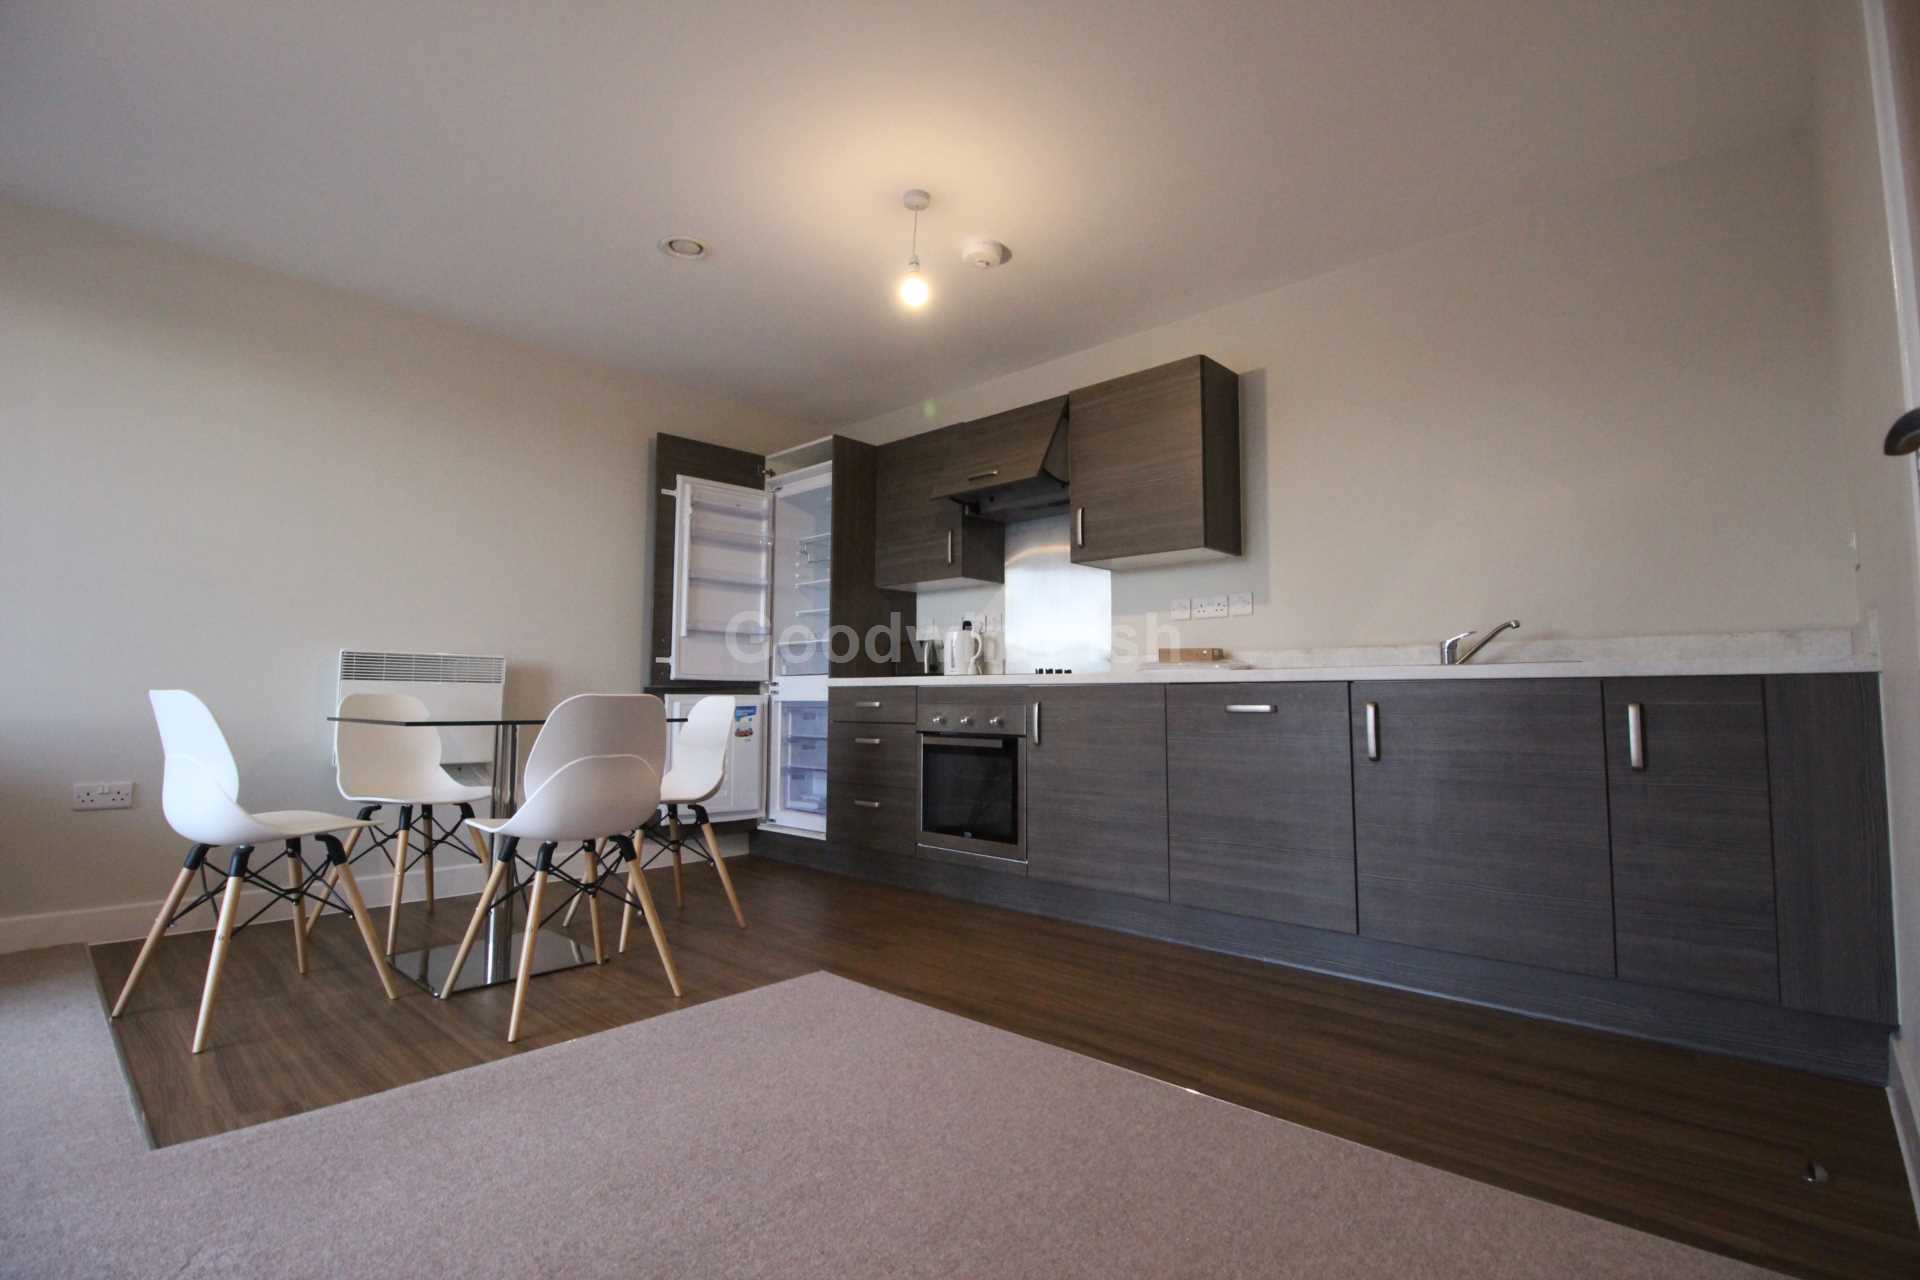 1 bed Apartment for rent in Salford. From Goodwin Fish & Co - Manchester